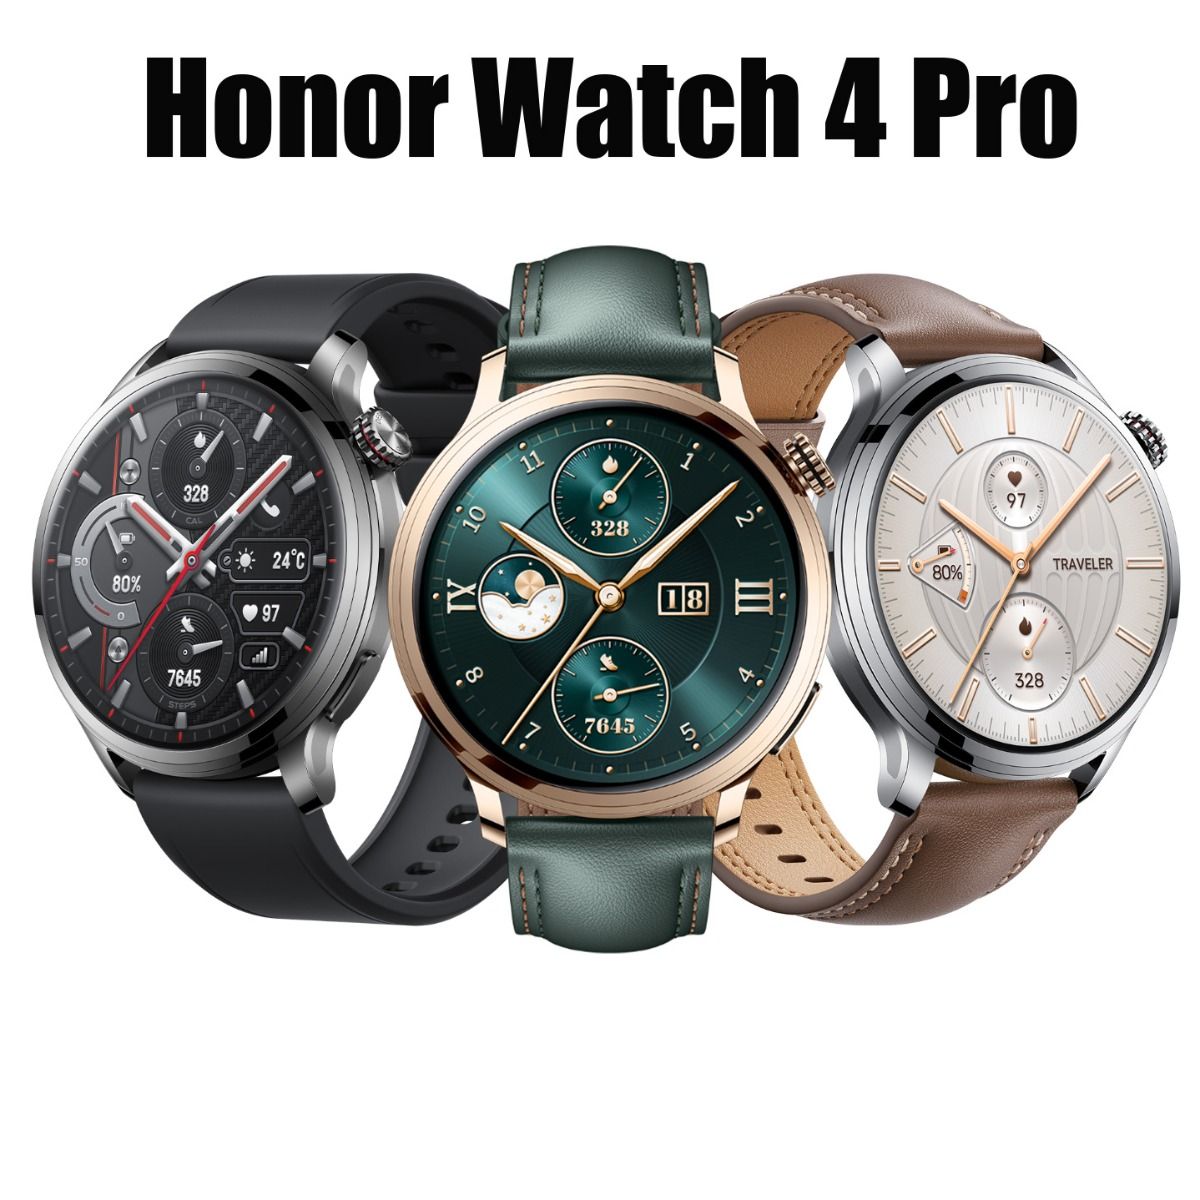 HONOR Watch 4 Pro with 1.5″ LTPO AMOLED screen, Stainless steel body, GPS  announced